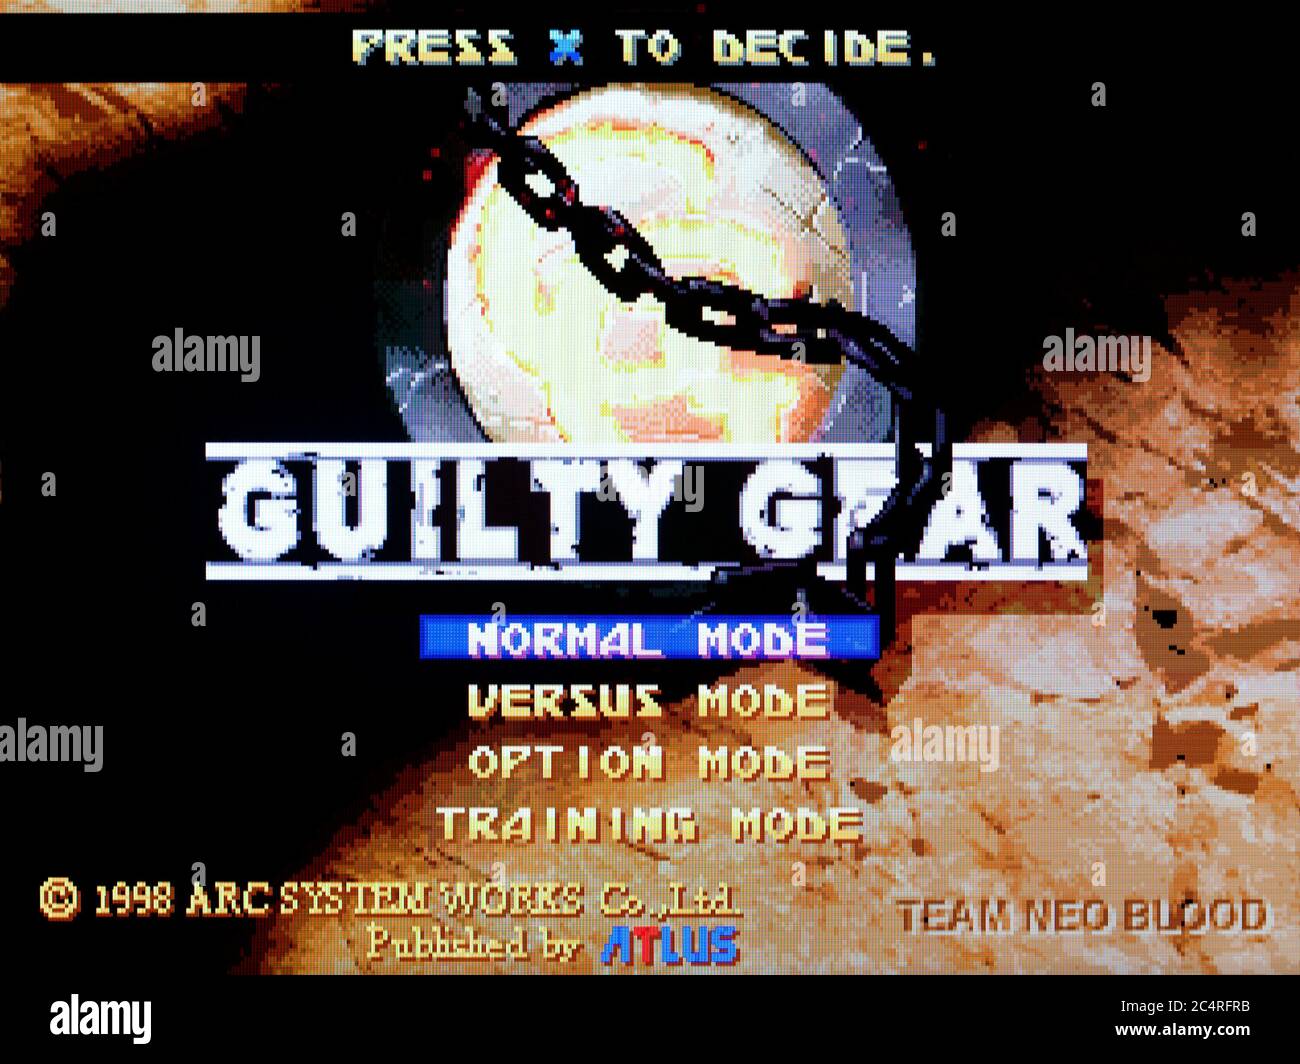 Guilty Gear - Sony Playstation 1 PS1 PSX - Editorial use only Stock Photo